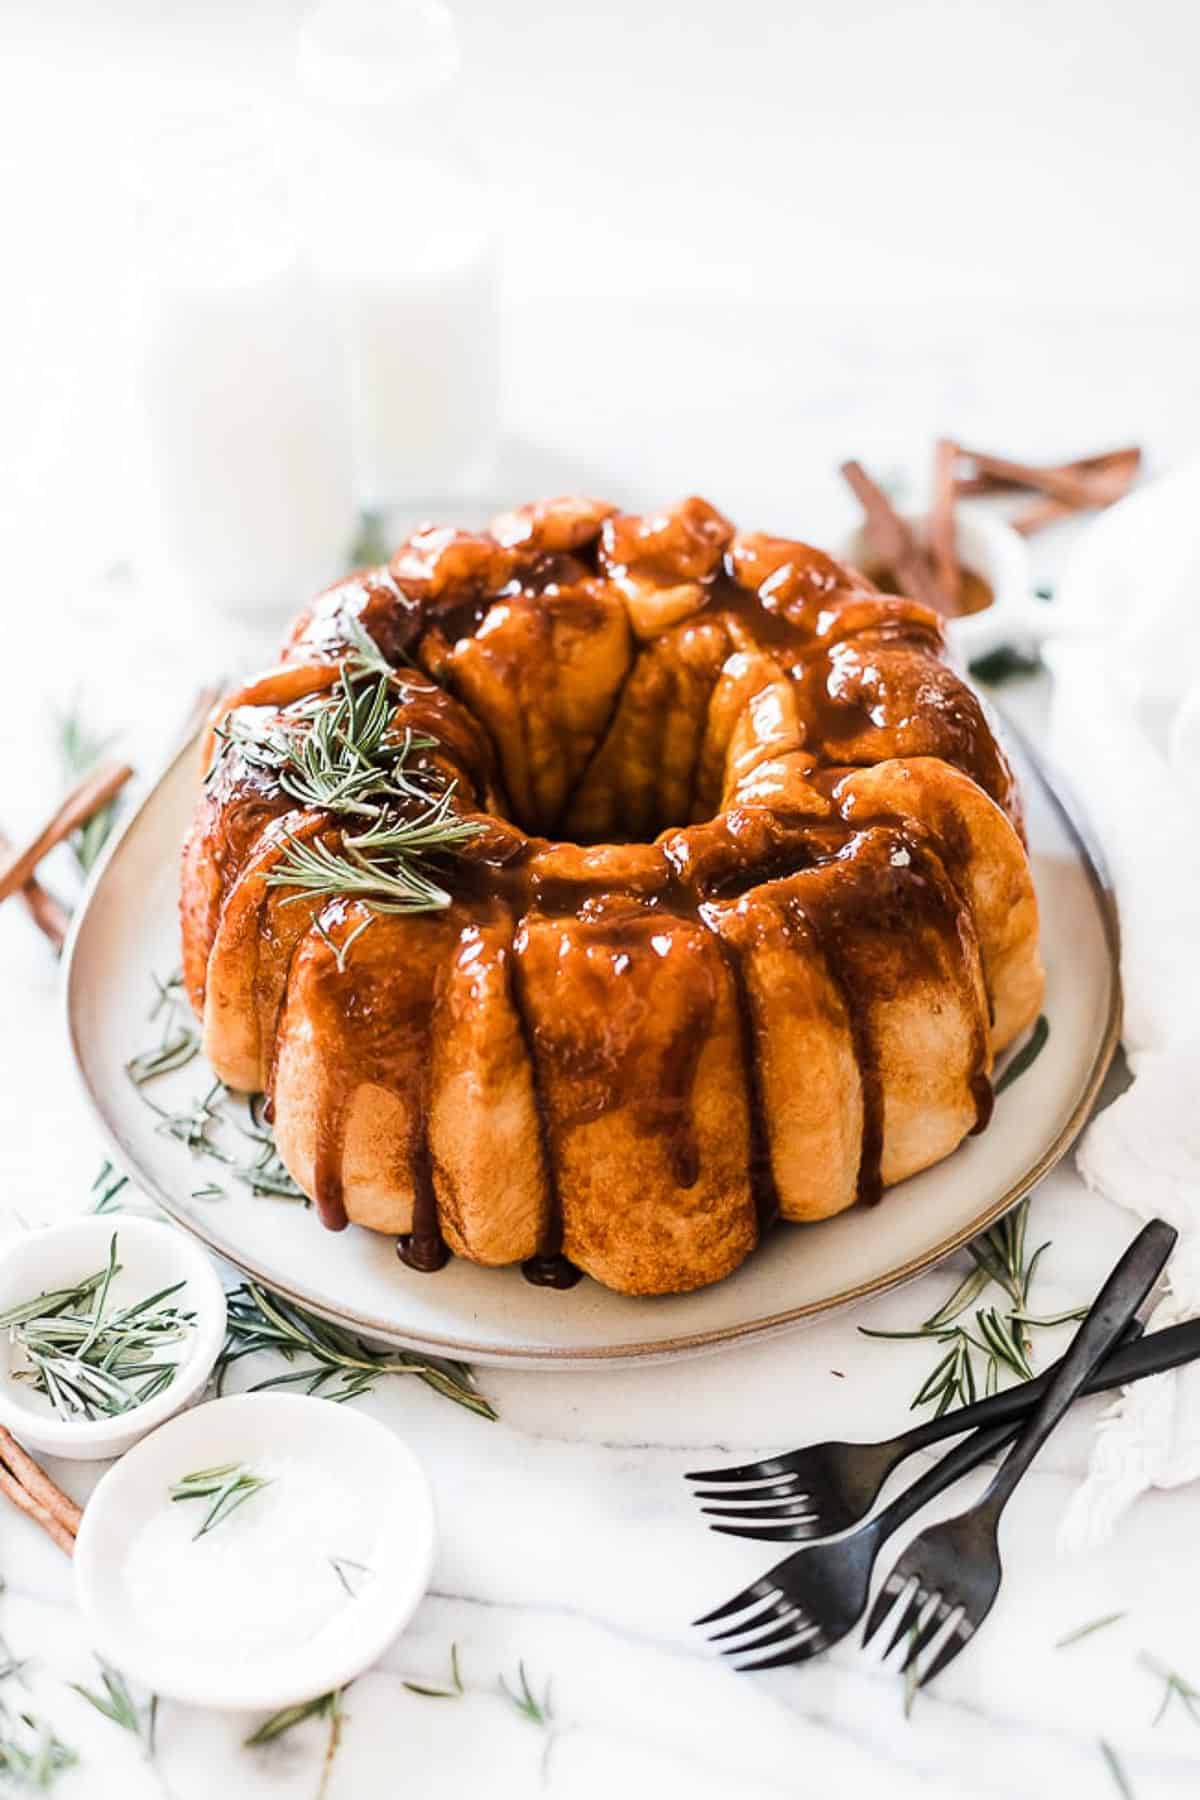 Easy monkey bread recipe prepared and plated on a cream platter. There are black forks to the side.